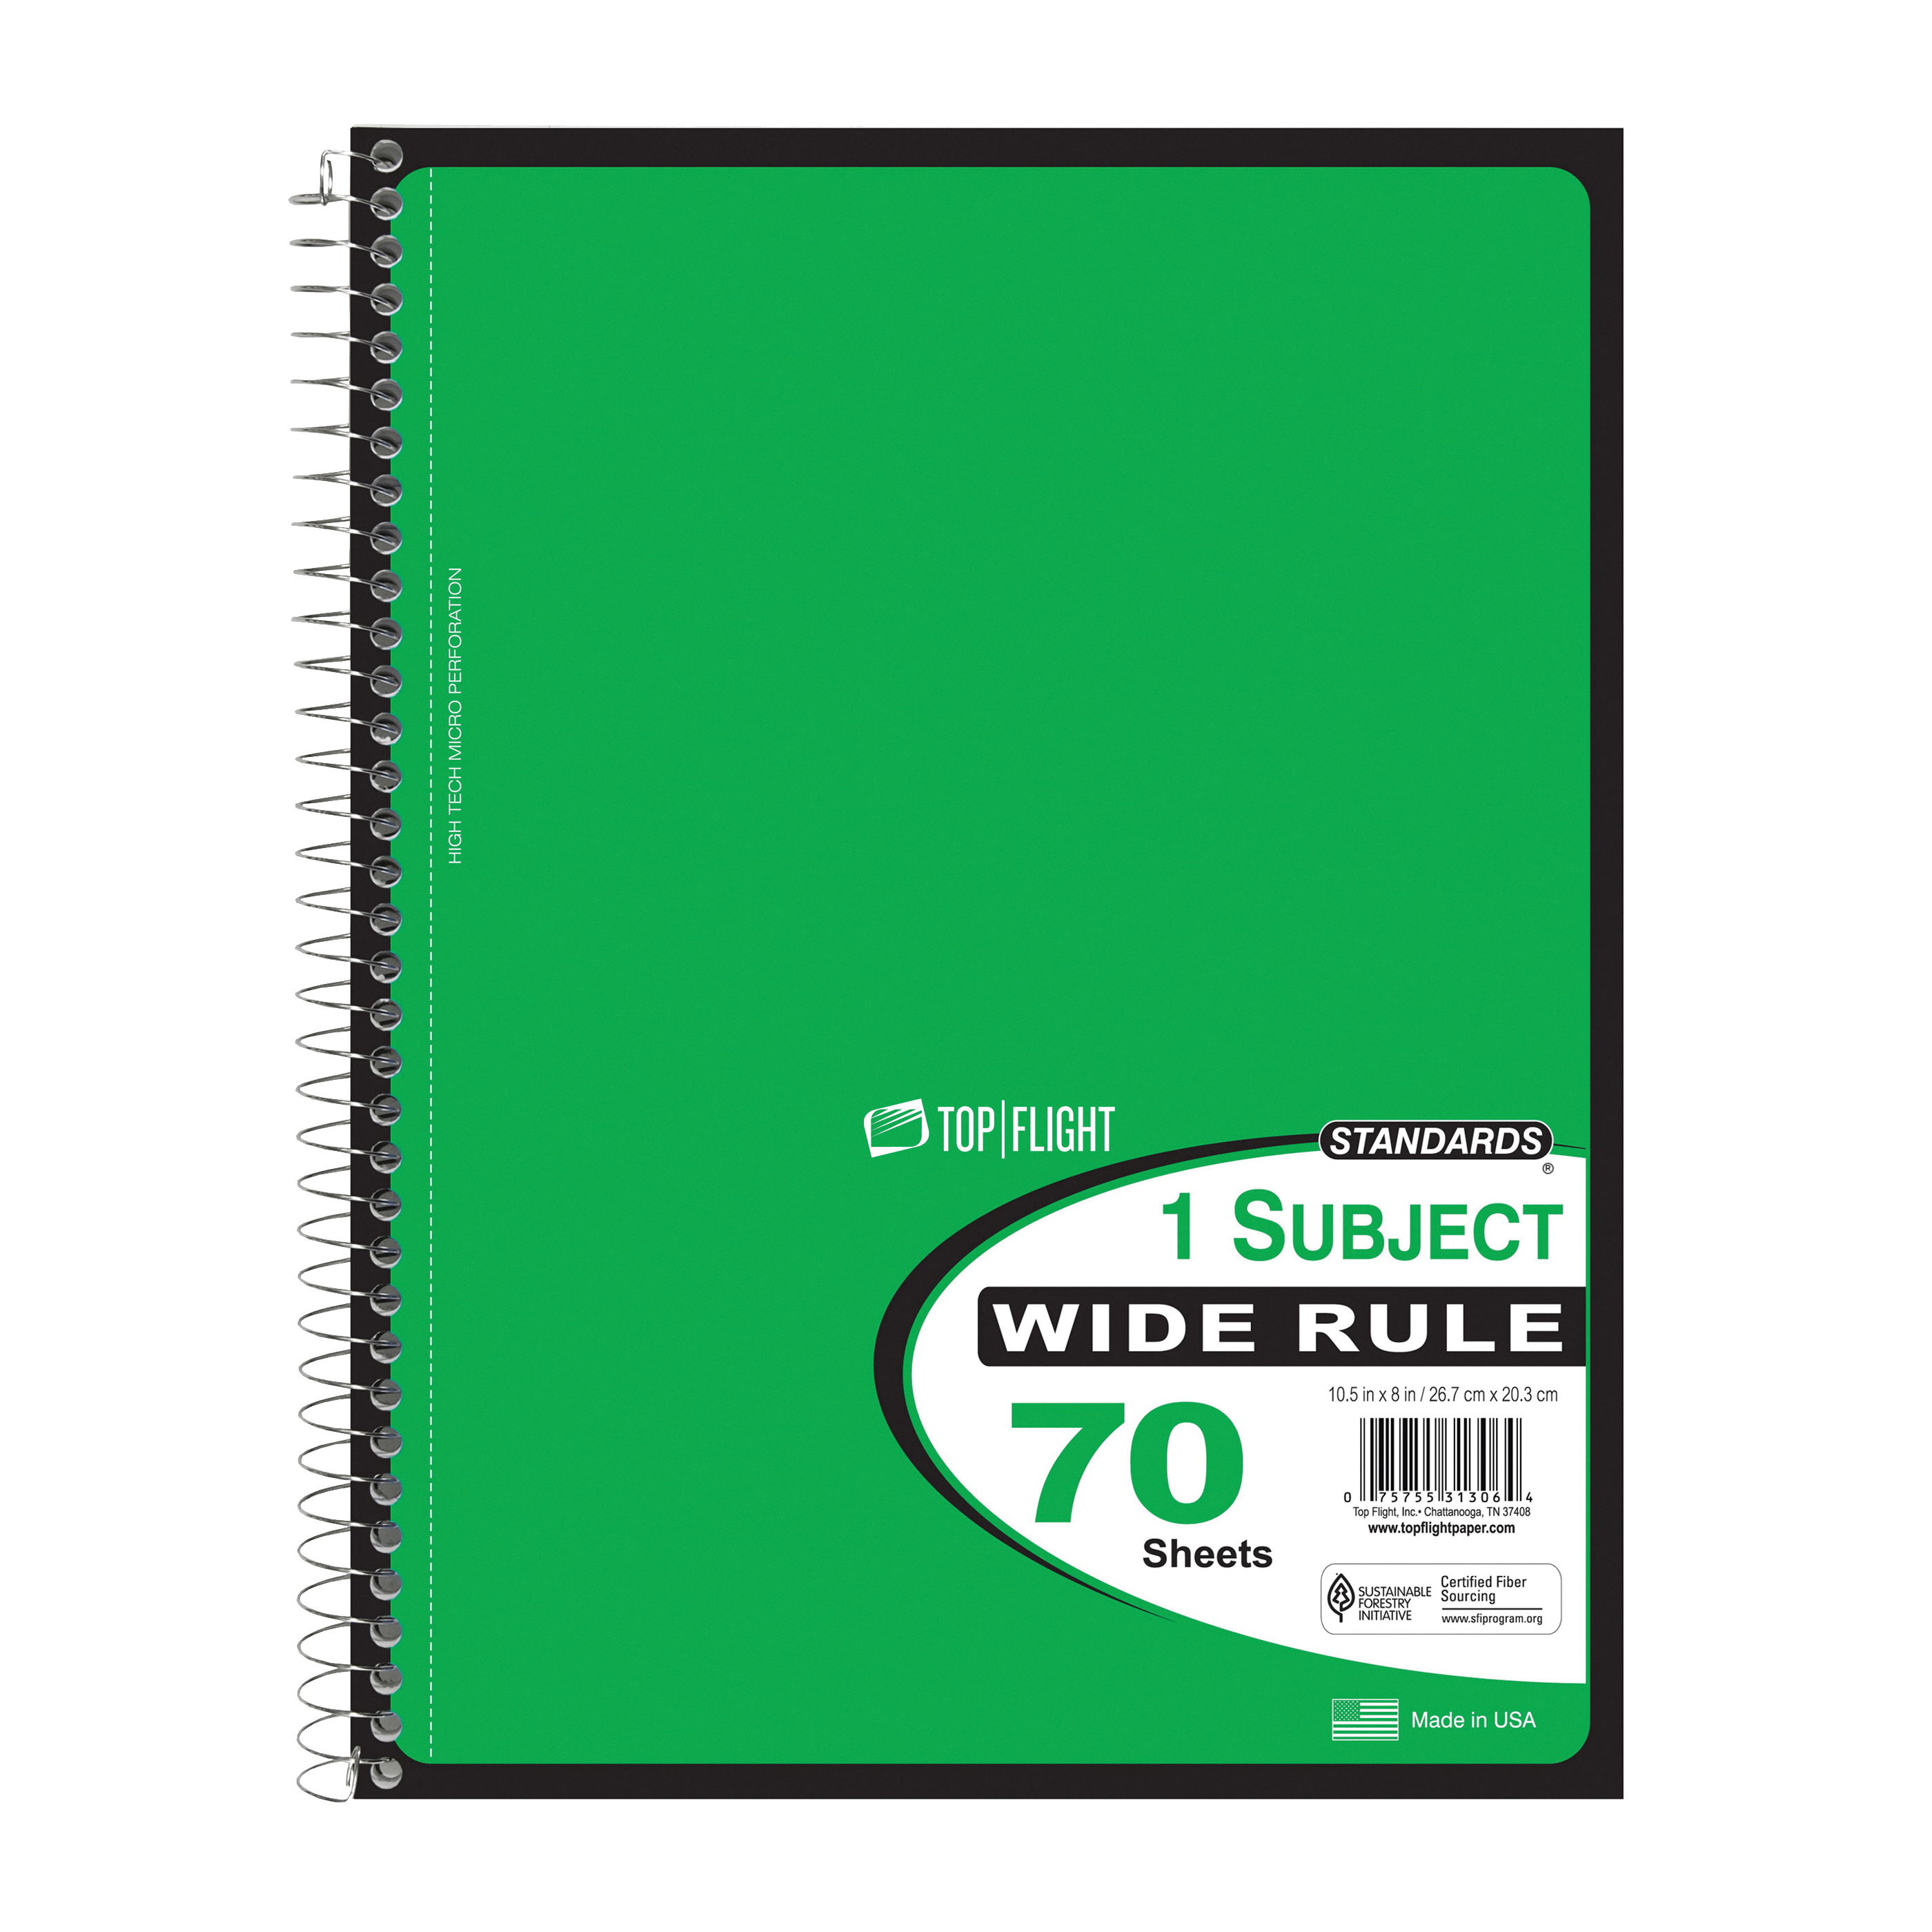 Top Flight WB70PF Series 4510816 Wide Rule Notebook, Micro-Perforated Sheet, 70-Sheet, Wirebound Binding - 1